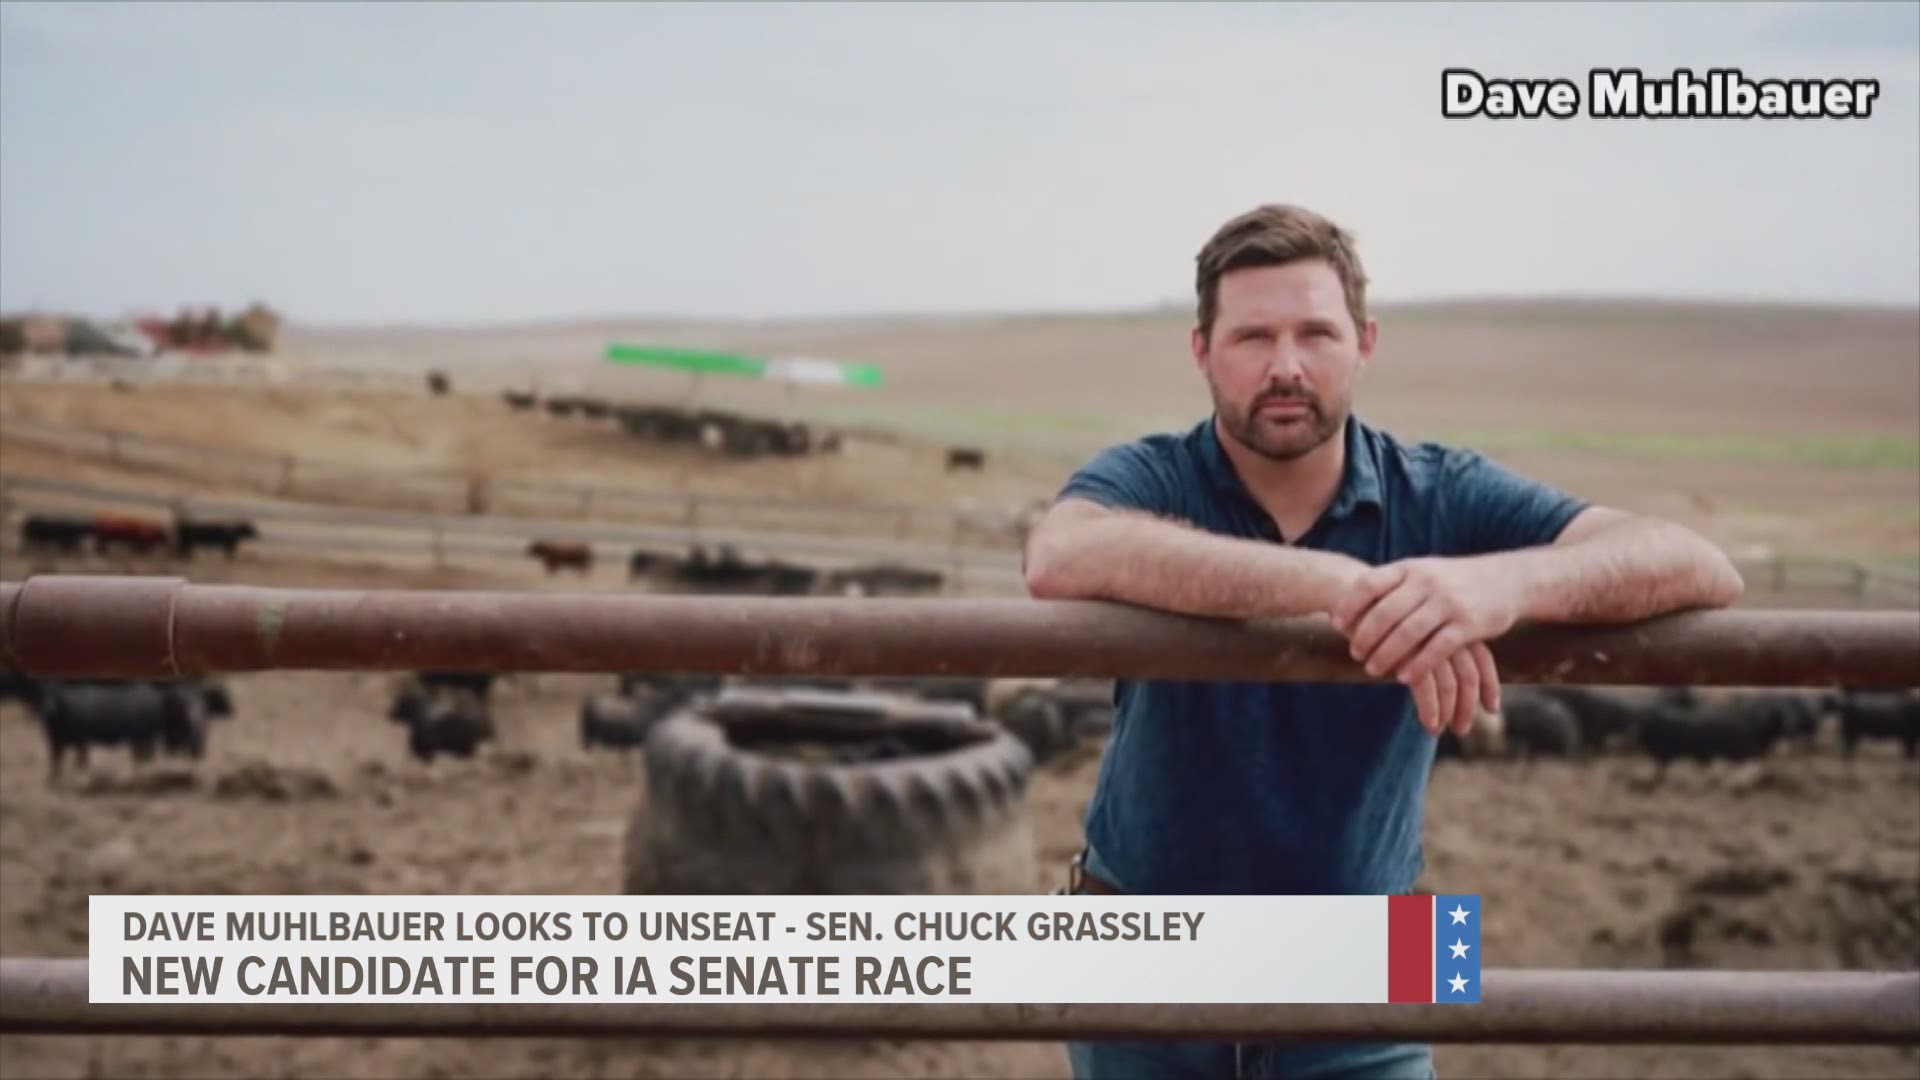 In a campaign video released Monday, Dave Muhlbauer says many Iowa voters “just feel like Democrats are leaving rural areas high and dry.”